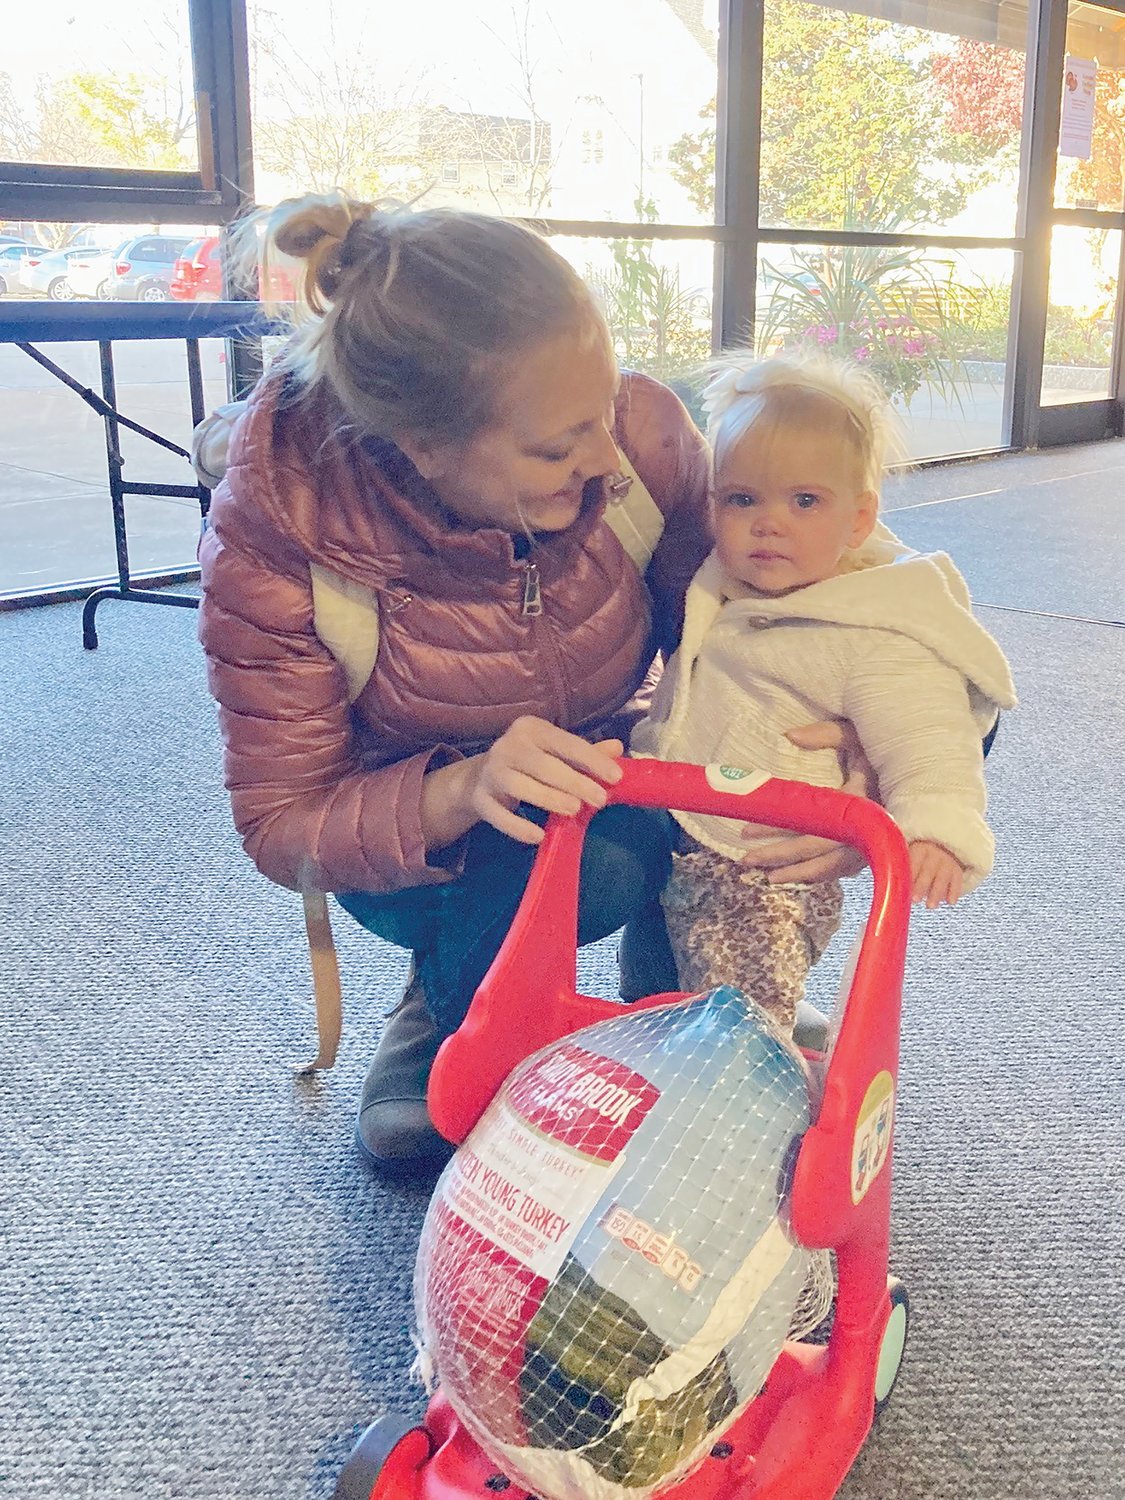 Throughout the November collection, friends and neighbors stopped by the residence with a turkey or two. One turkey was recently delivered by the tiniest of donors — a one-year-old who rolled it into the Home with her own cart, above.